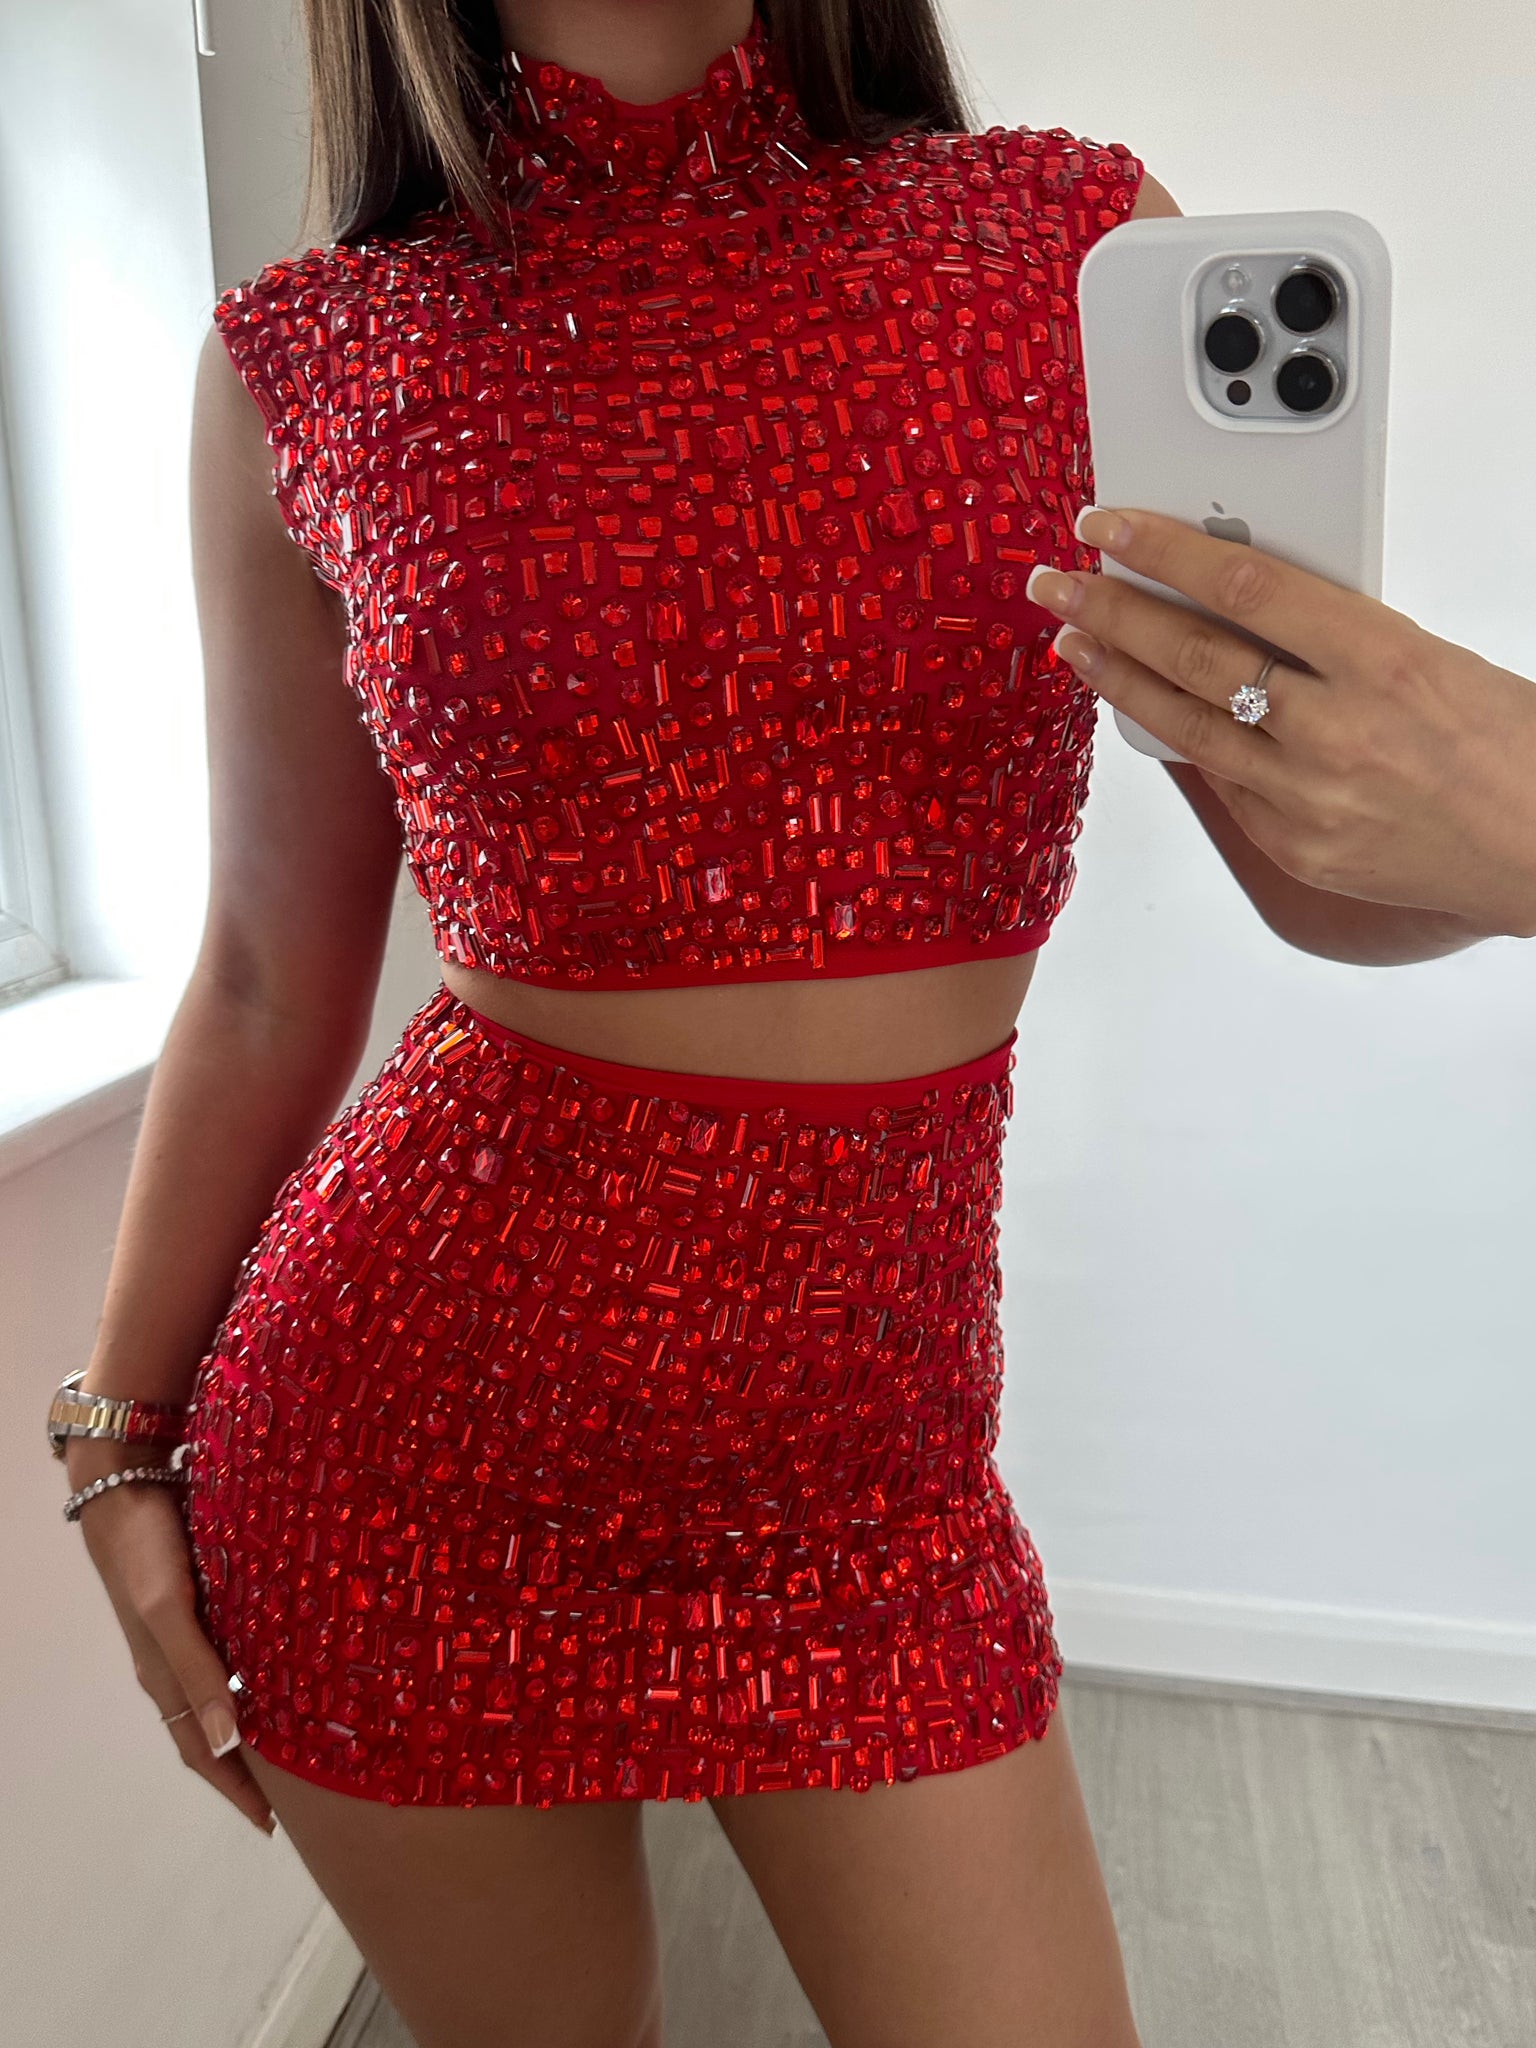 ‘16 WISHES’ Embellished Co Ord - Red